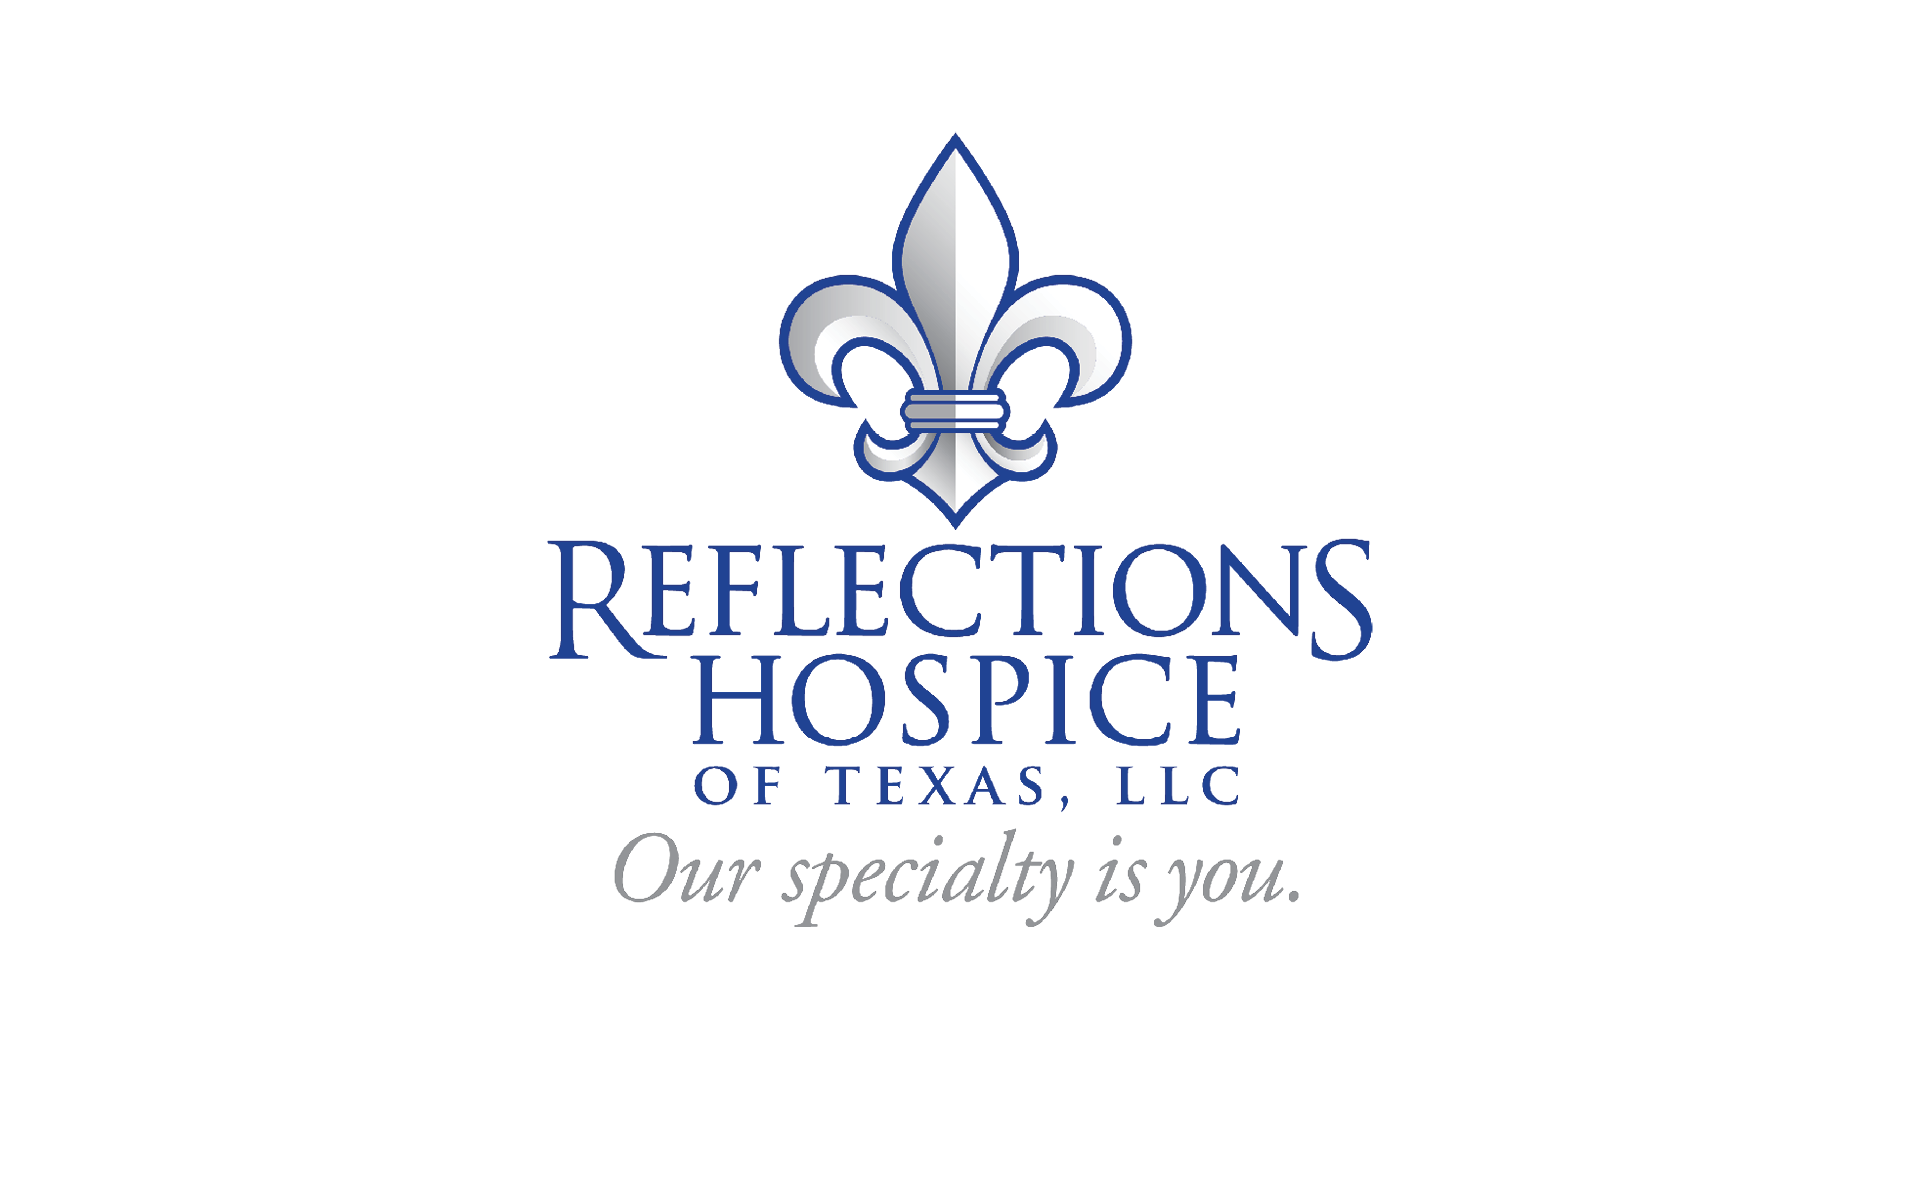 REFLECTIONS HOSPICE OF EAST TEXAS